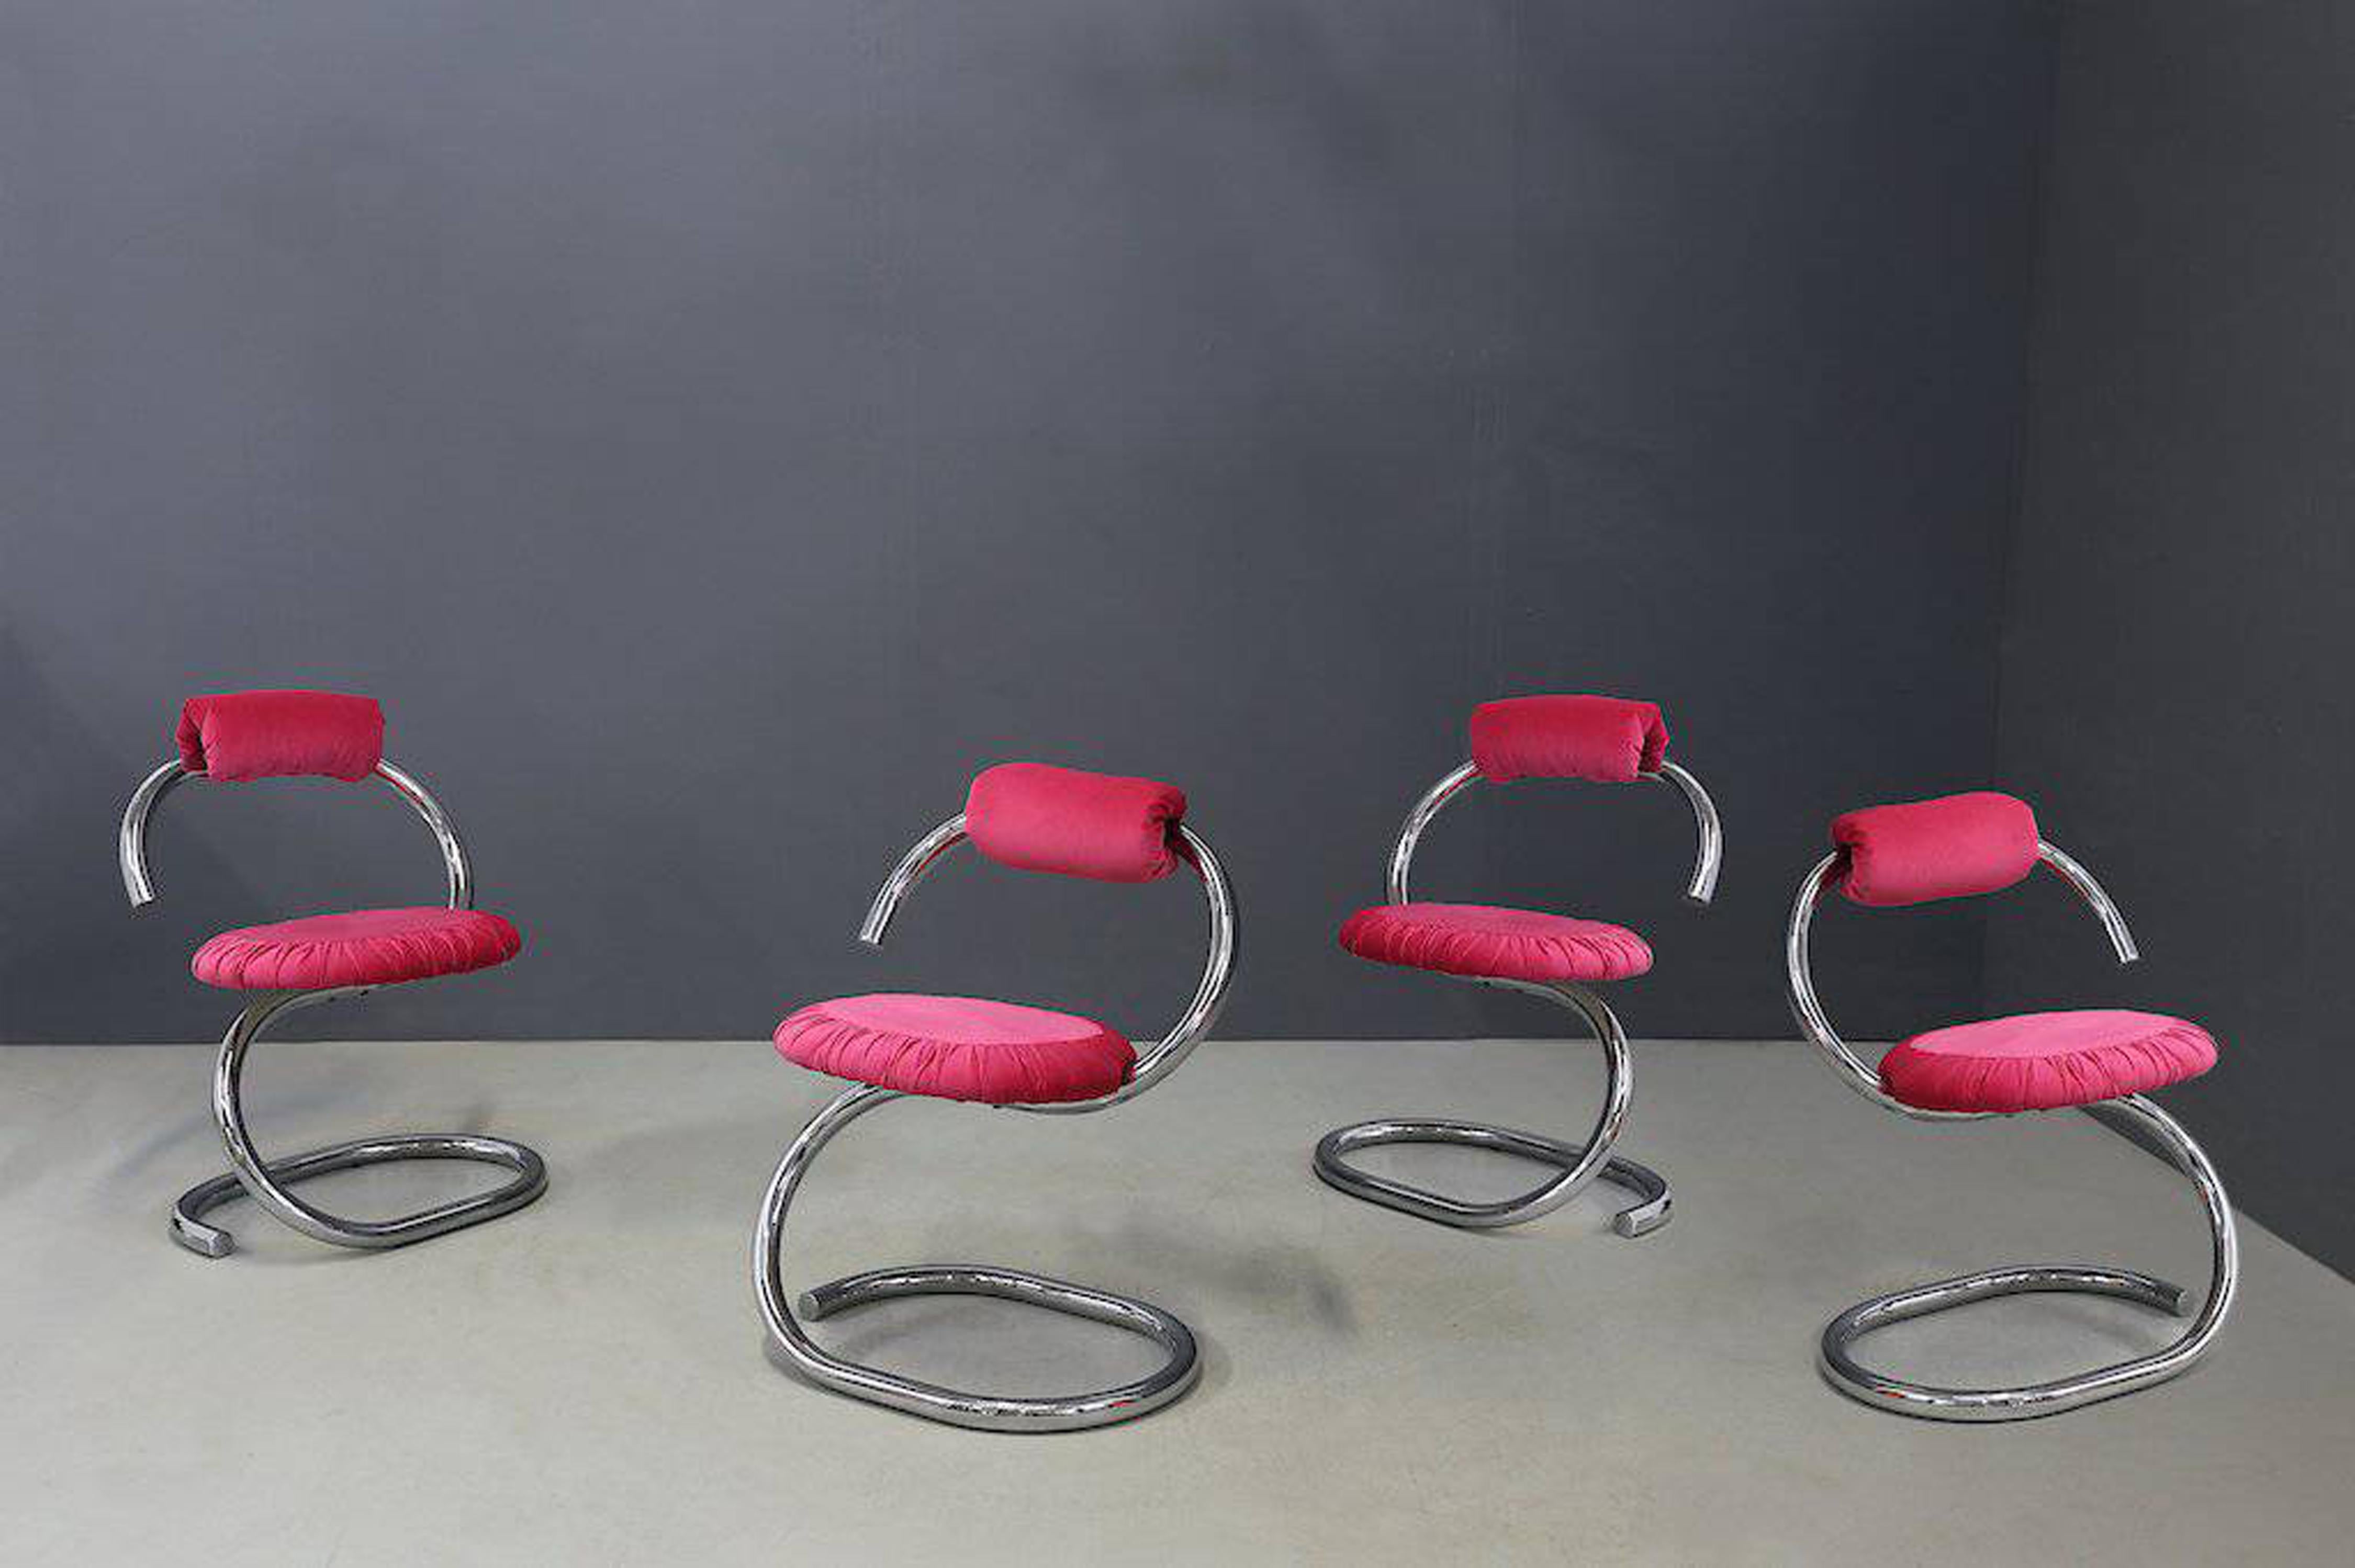 Cobra or Spirale chair designed by Giotto Stoppino in 1975.
The spiral and cantilevered chrome structure supports a seat and clip-on back cushion in vibrant fuchsia velvet. The seat has a charming pleated detail around the perimeter. 

These